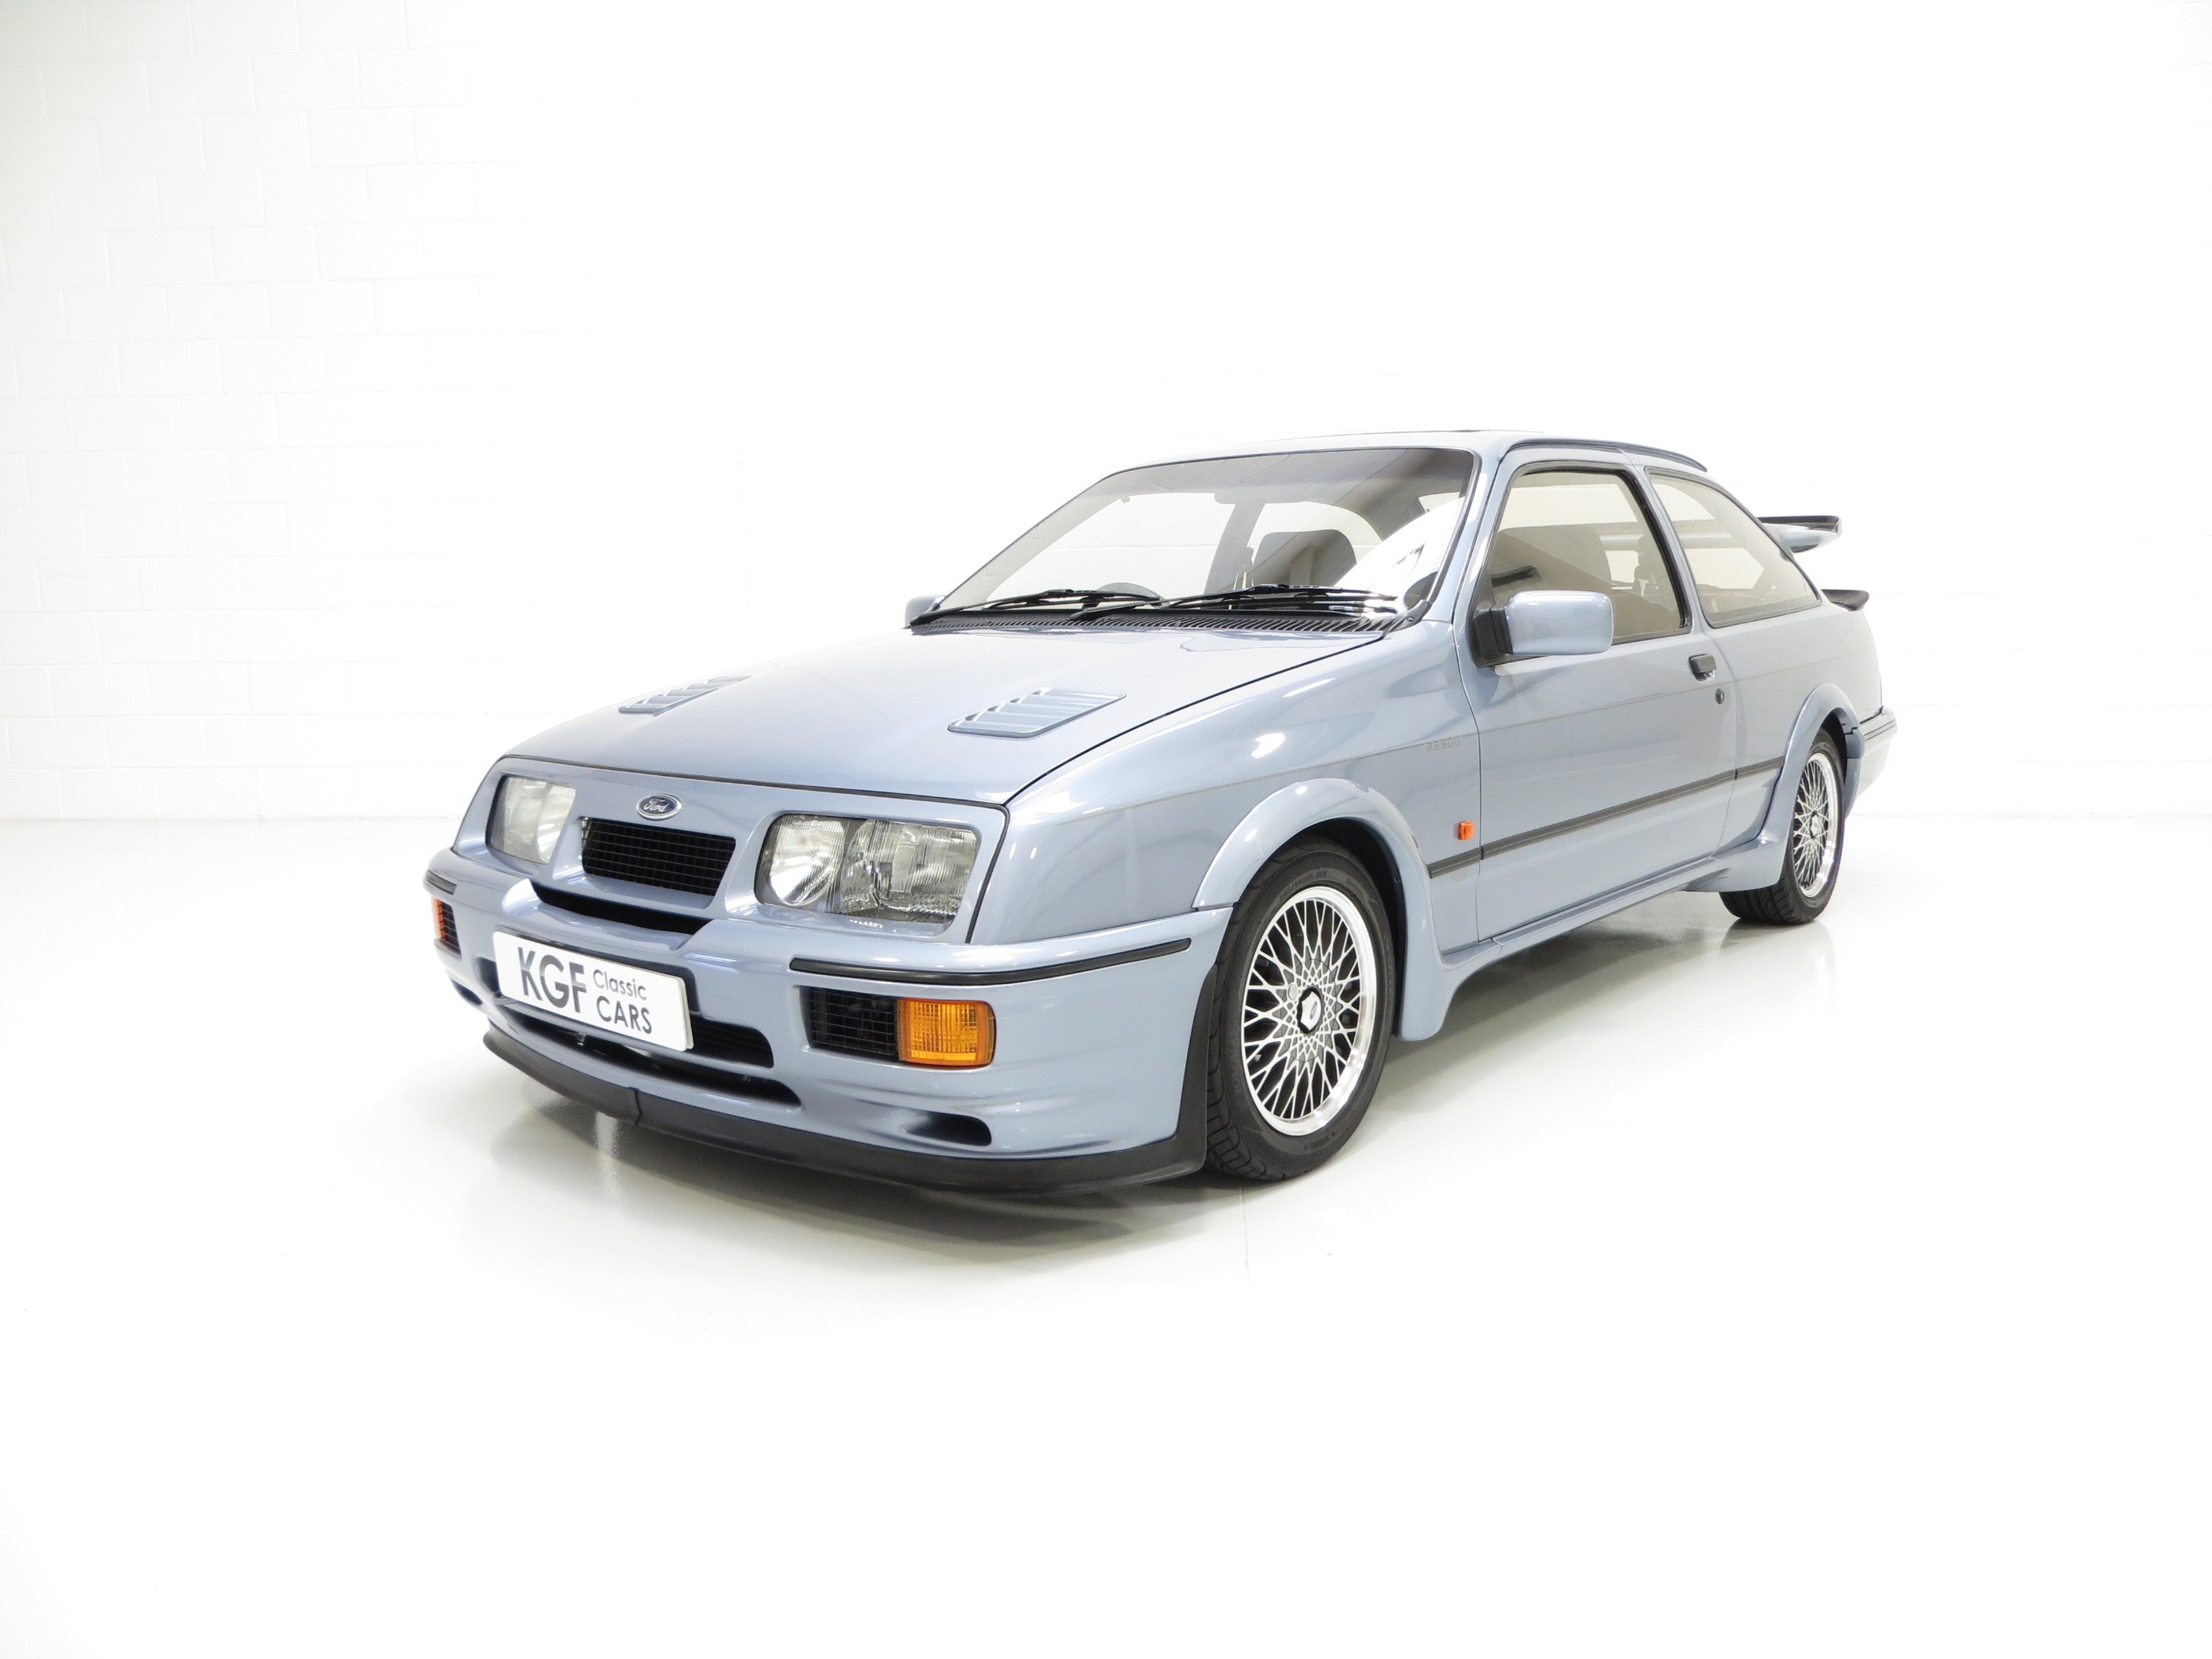 General 2816x2112 Ford Sierra car vehicle Ford white background simple background British cars